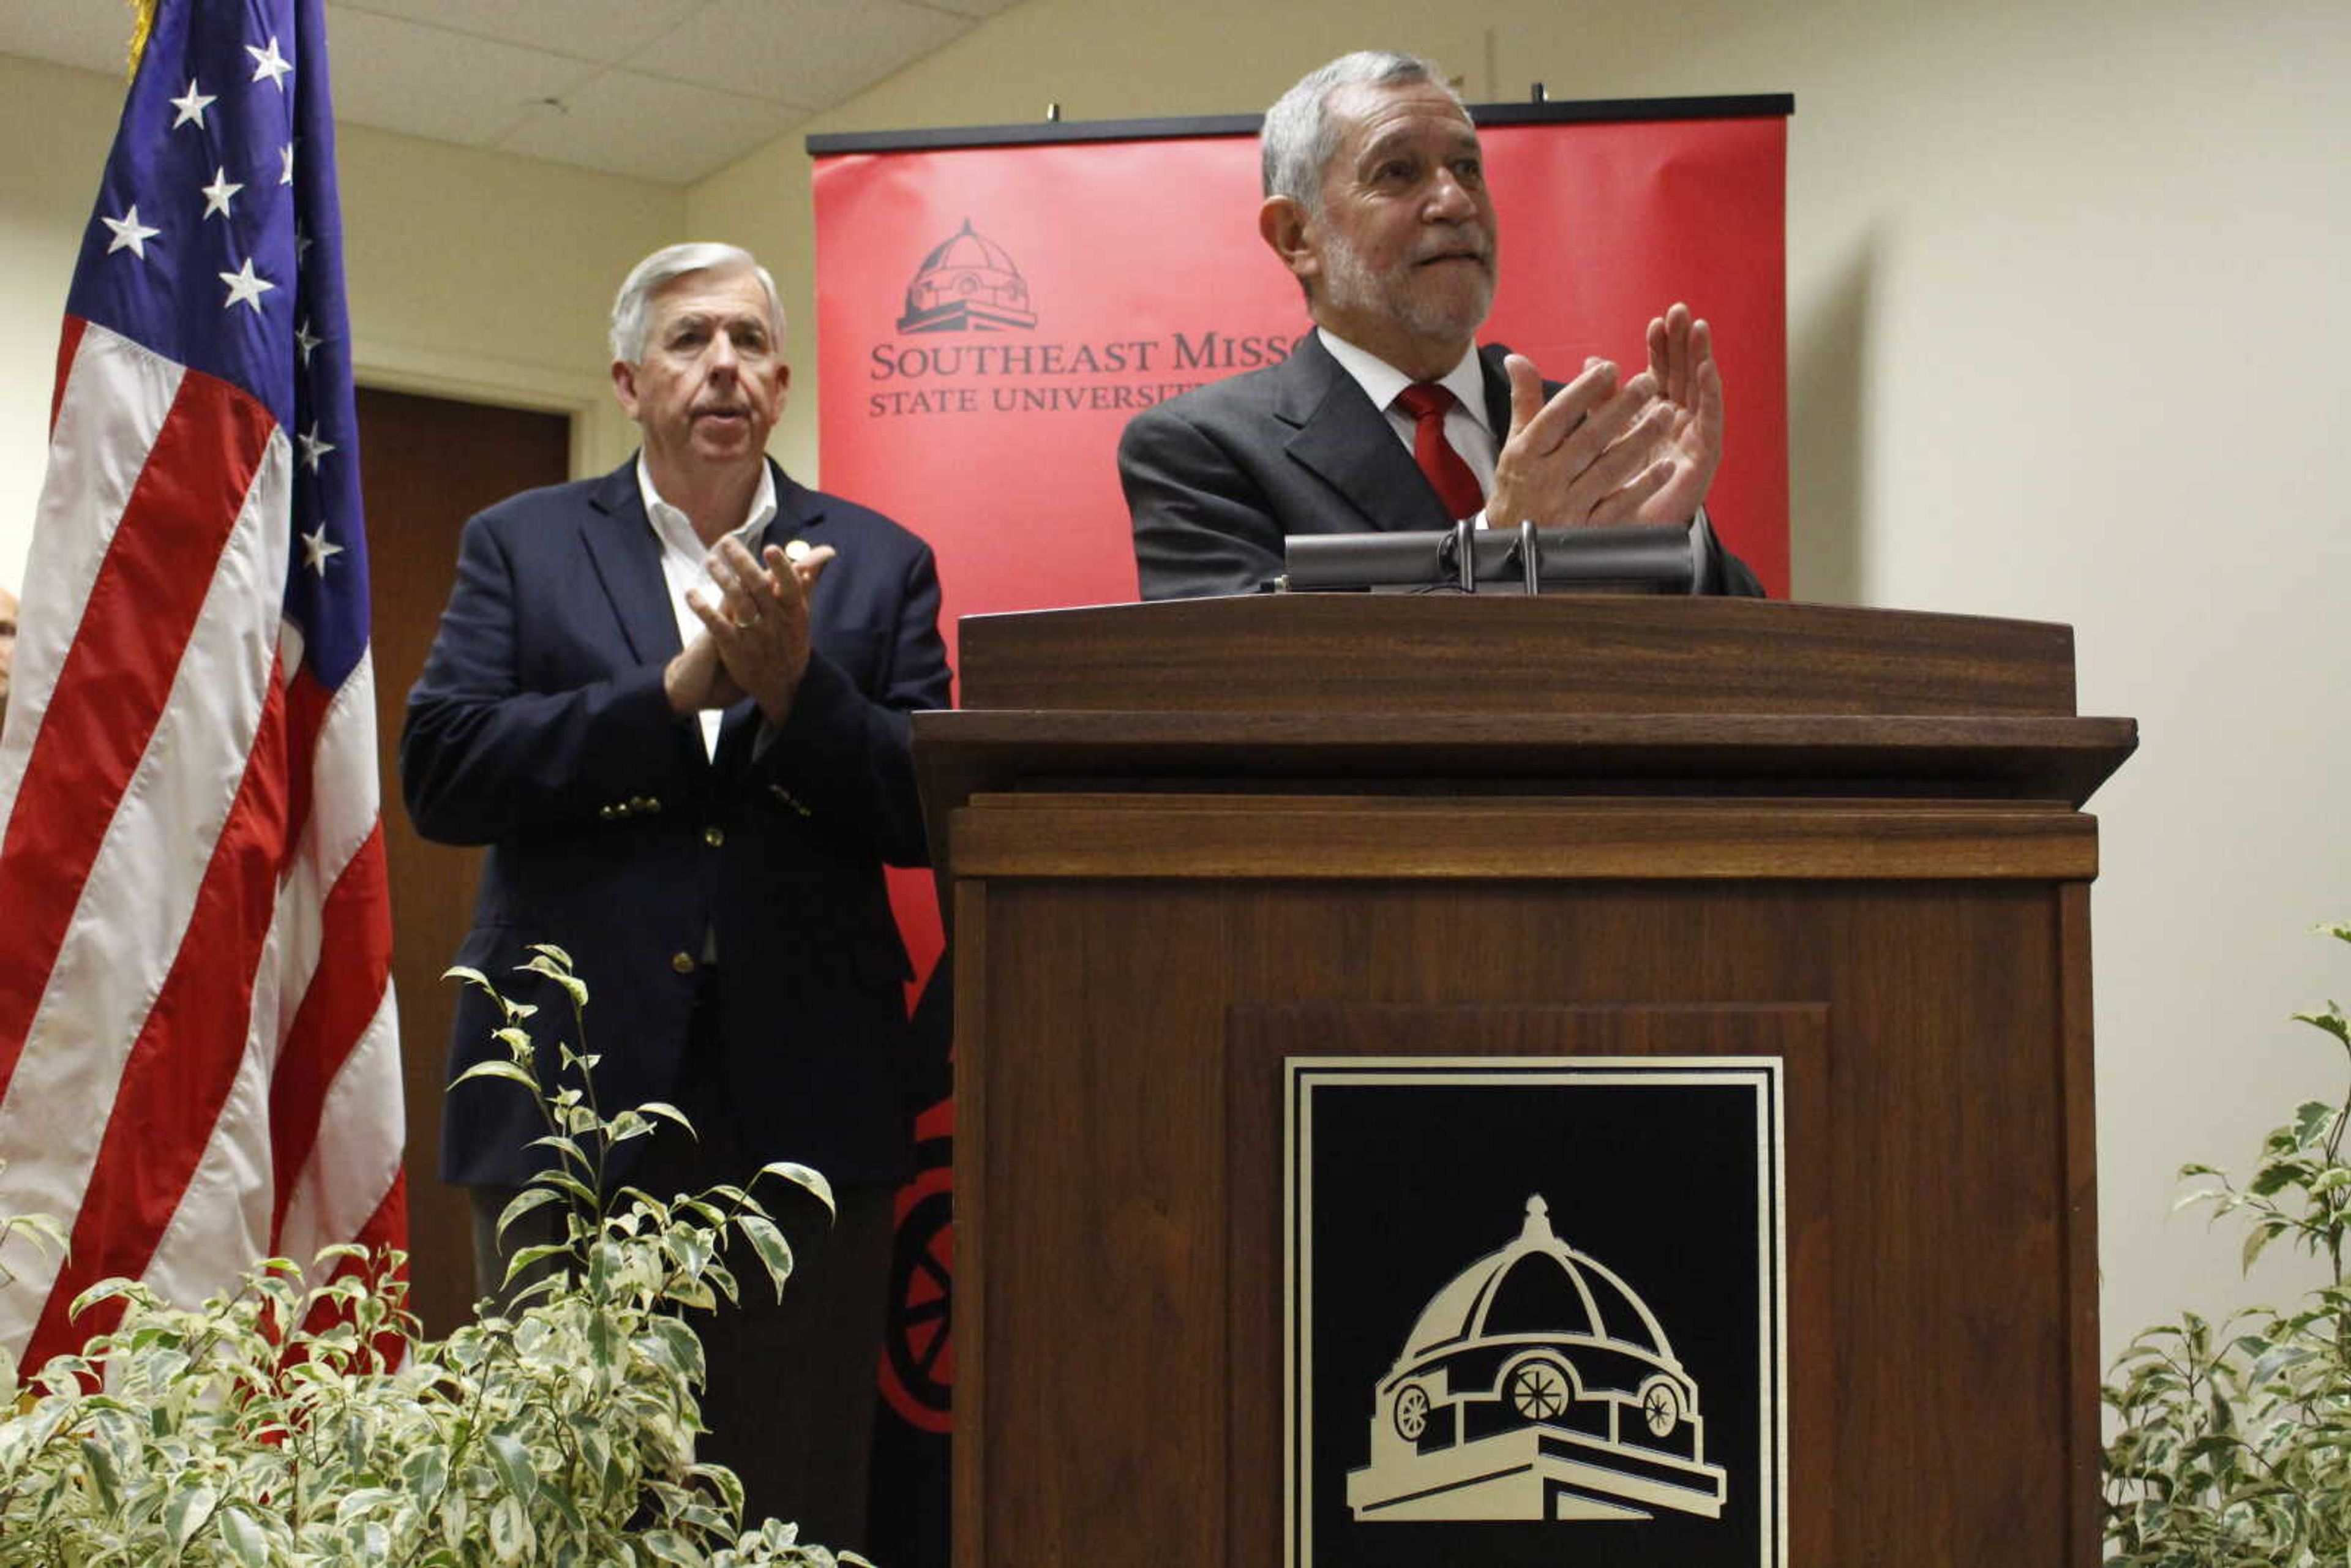 University president Carlos Vargas announced Aug. 31 that Southeast will introduce a designated space for cybersecurity majors. Missouri Governor Mike Parson (left) also spoke at the press conference.